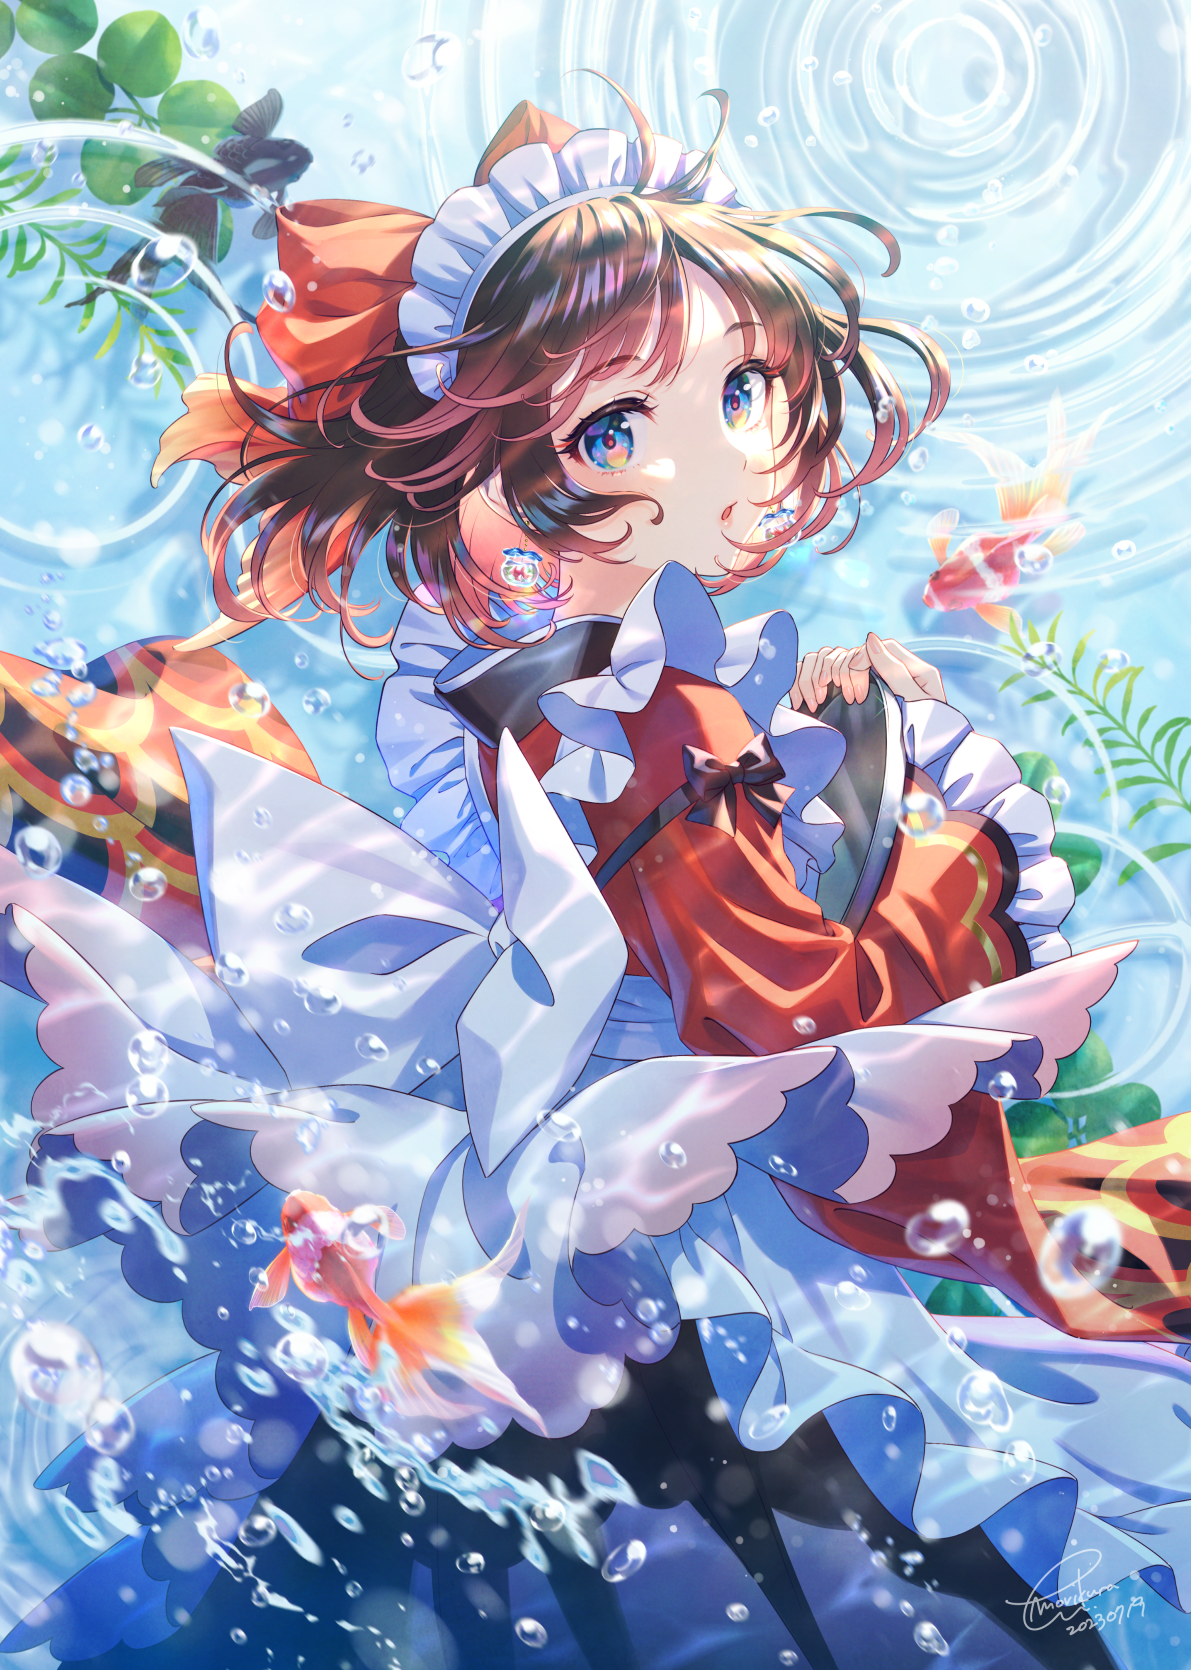 Anime Anime Girls Portrait Display Short Hair Maid Maid Outfit Fish Animals Bubbles Water Underwater 1191x1670